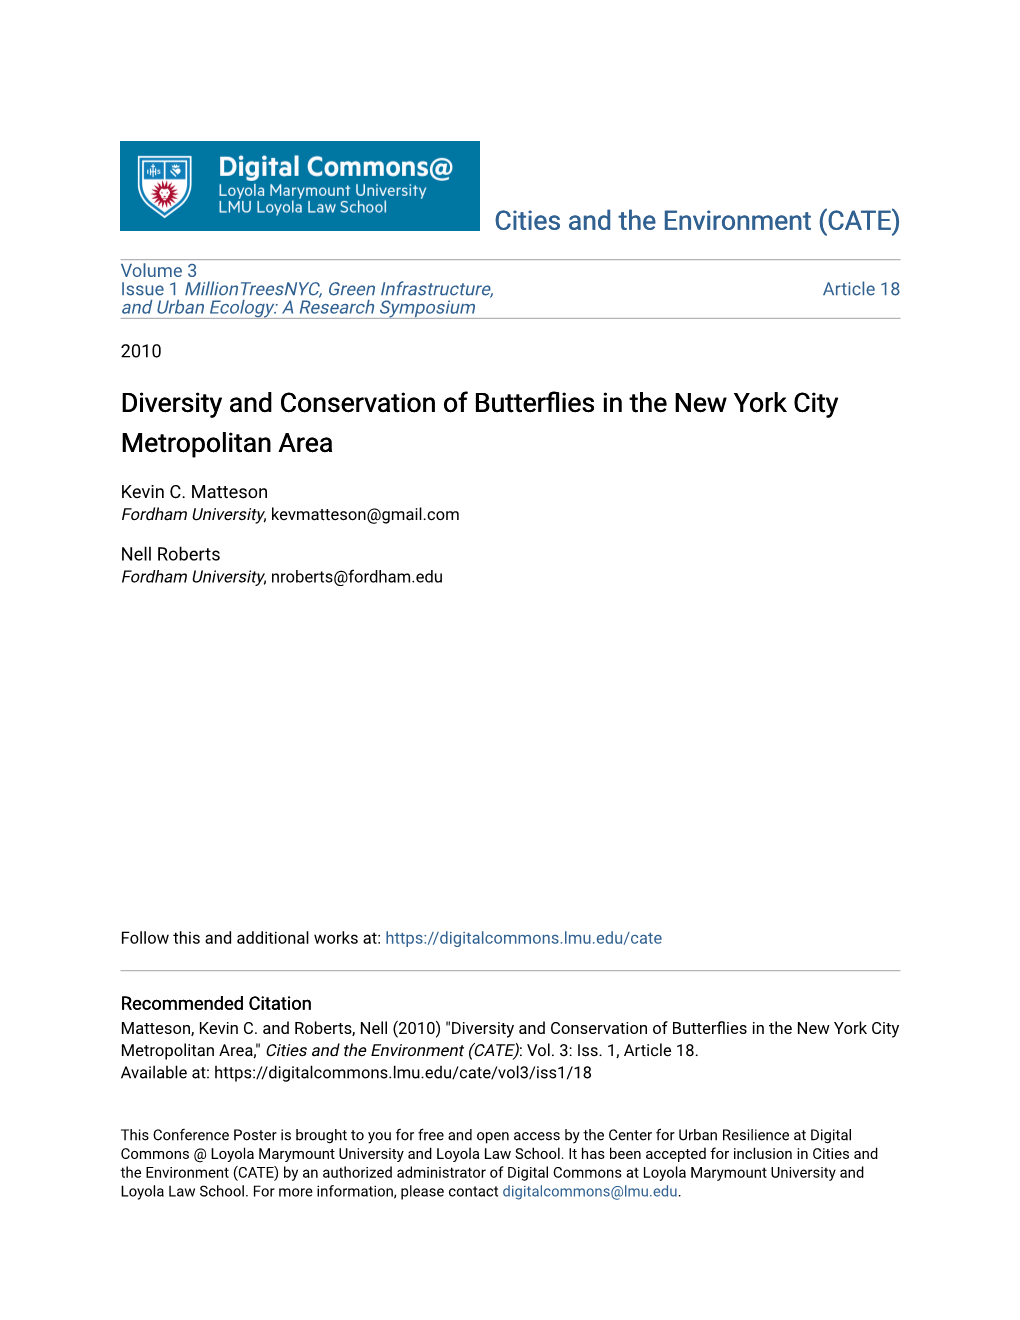 Diversity and Conservation of Butterflies in the New York City Me Kevin C